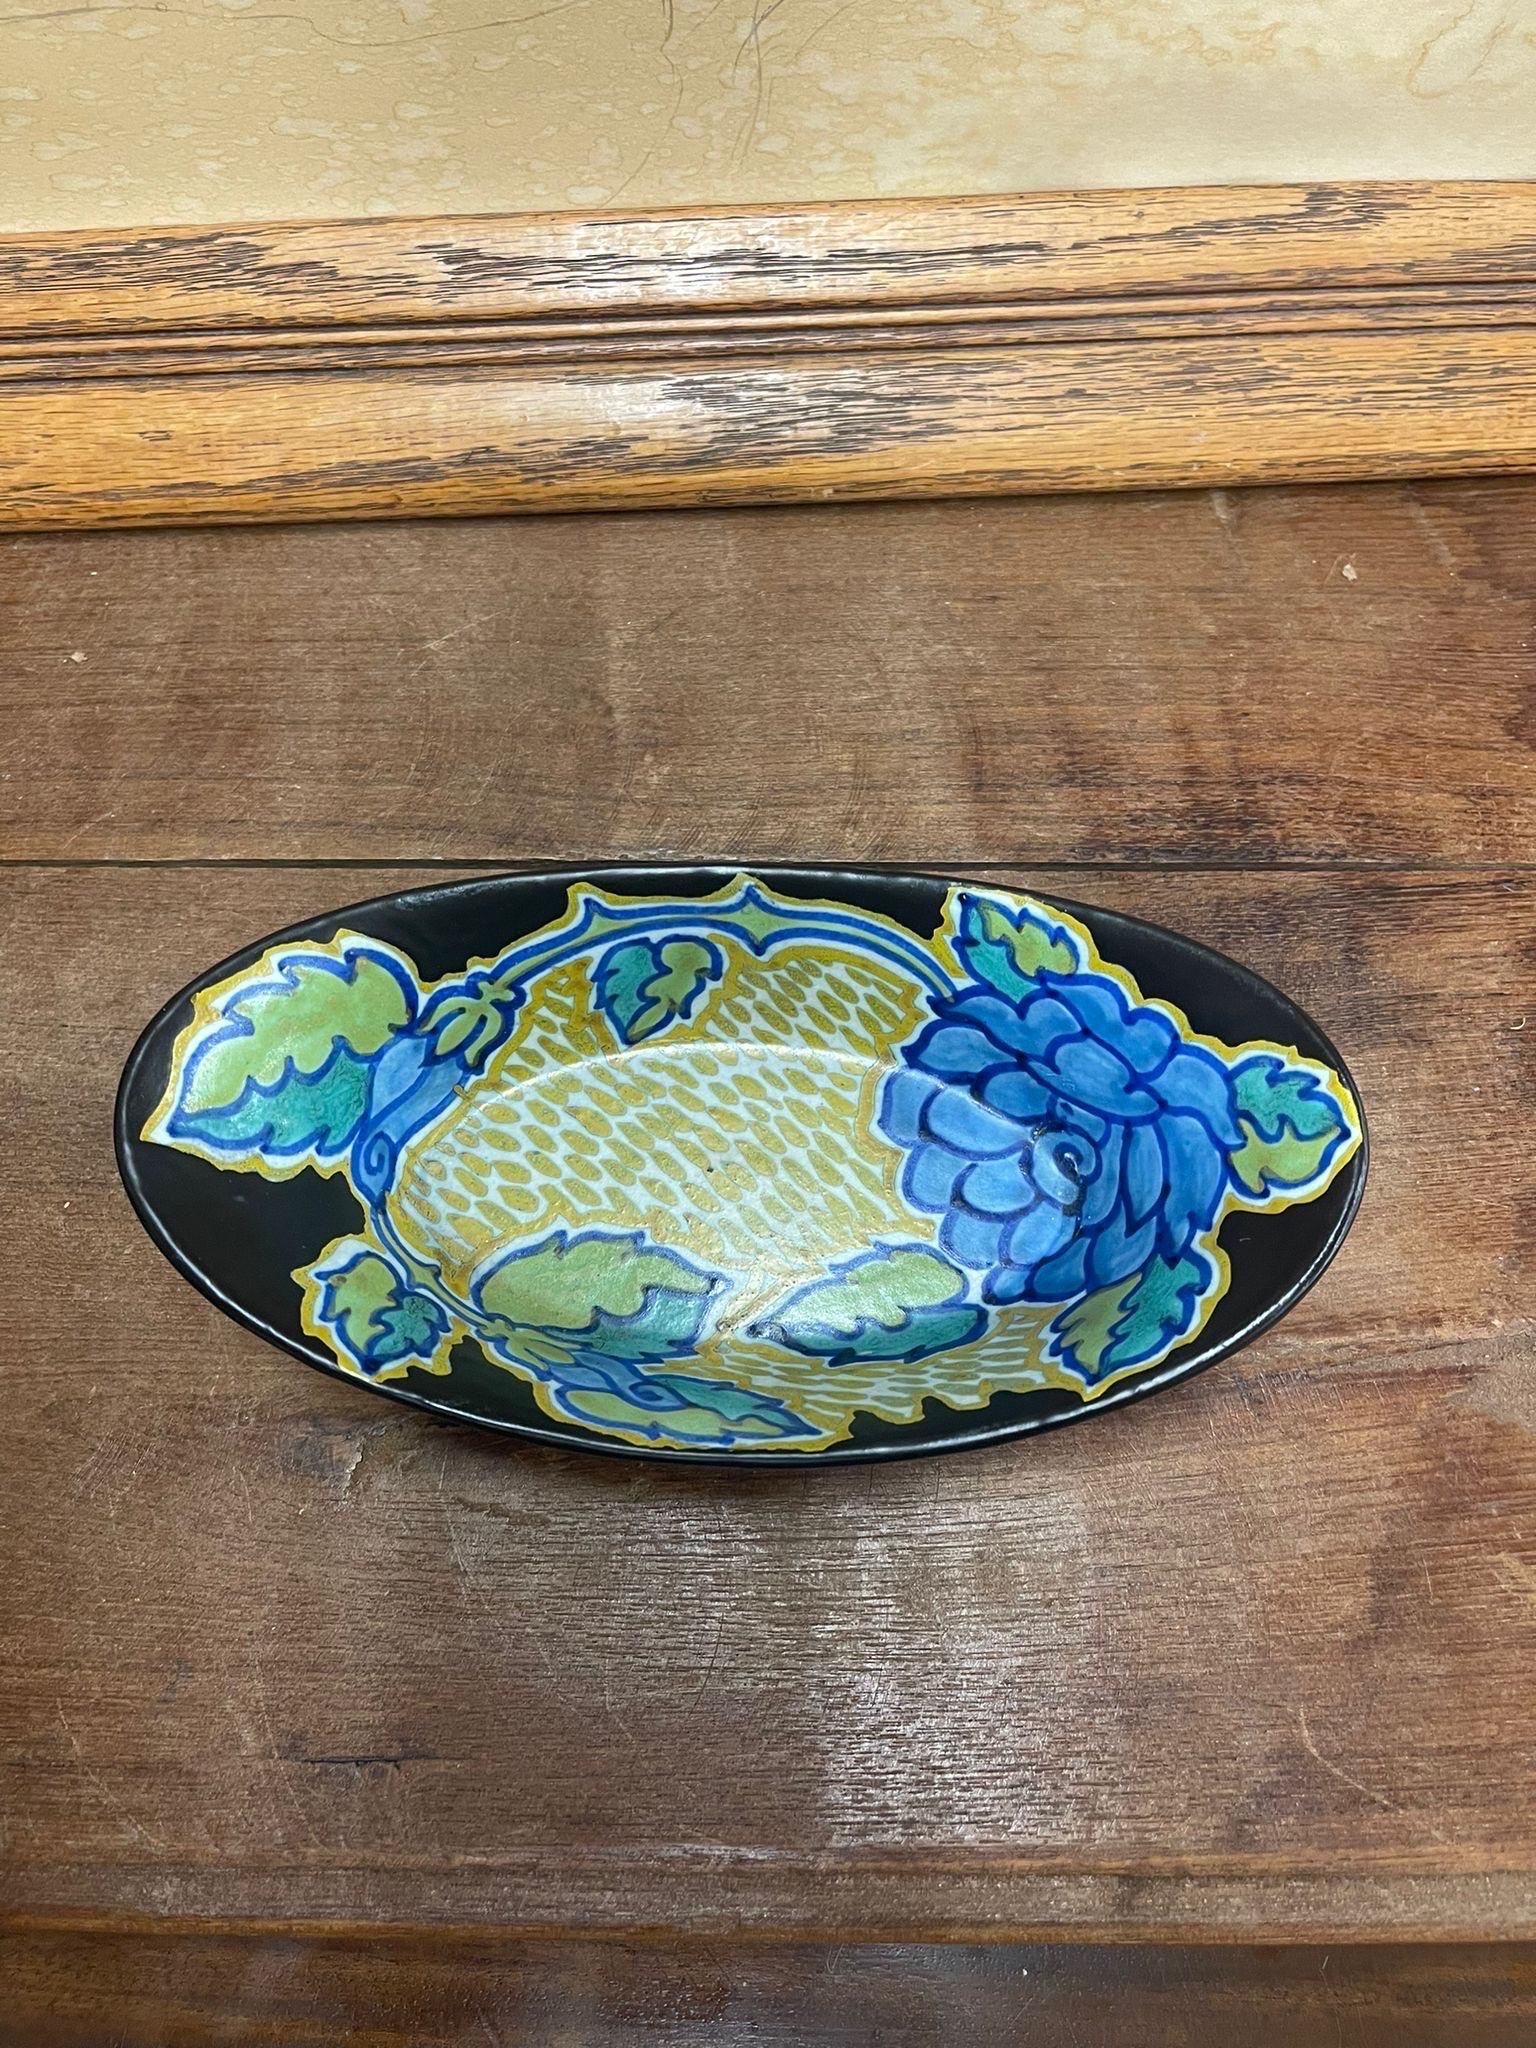 Metal Vintage Dish With Floral Motif. Amsterdam Import. For Sale